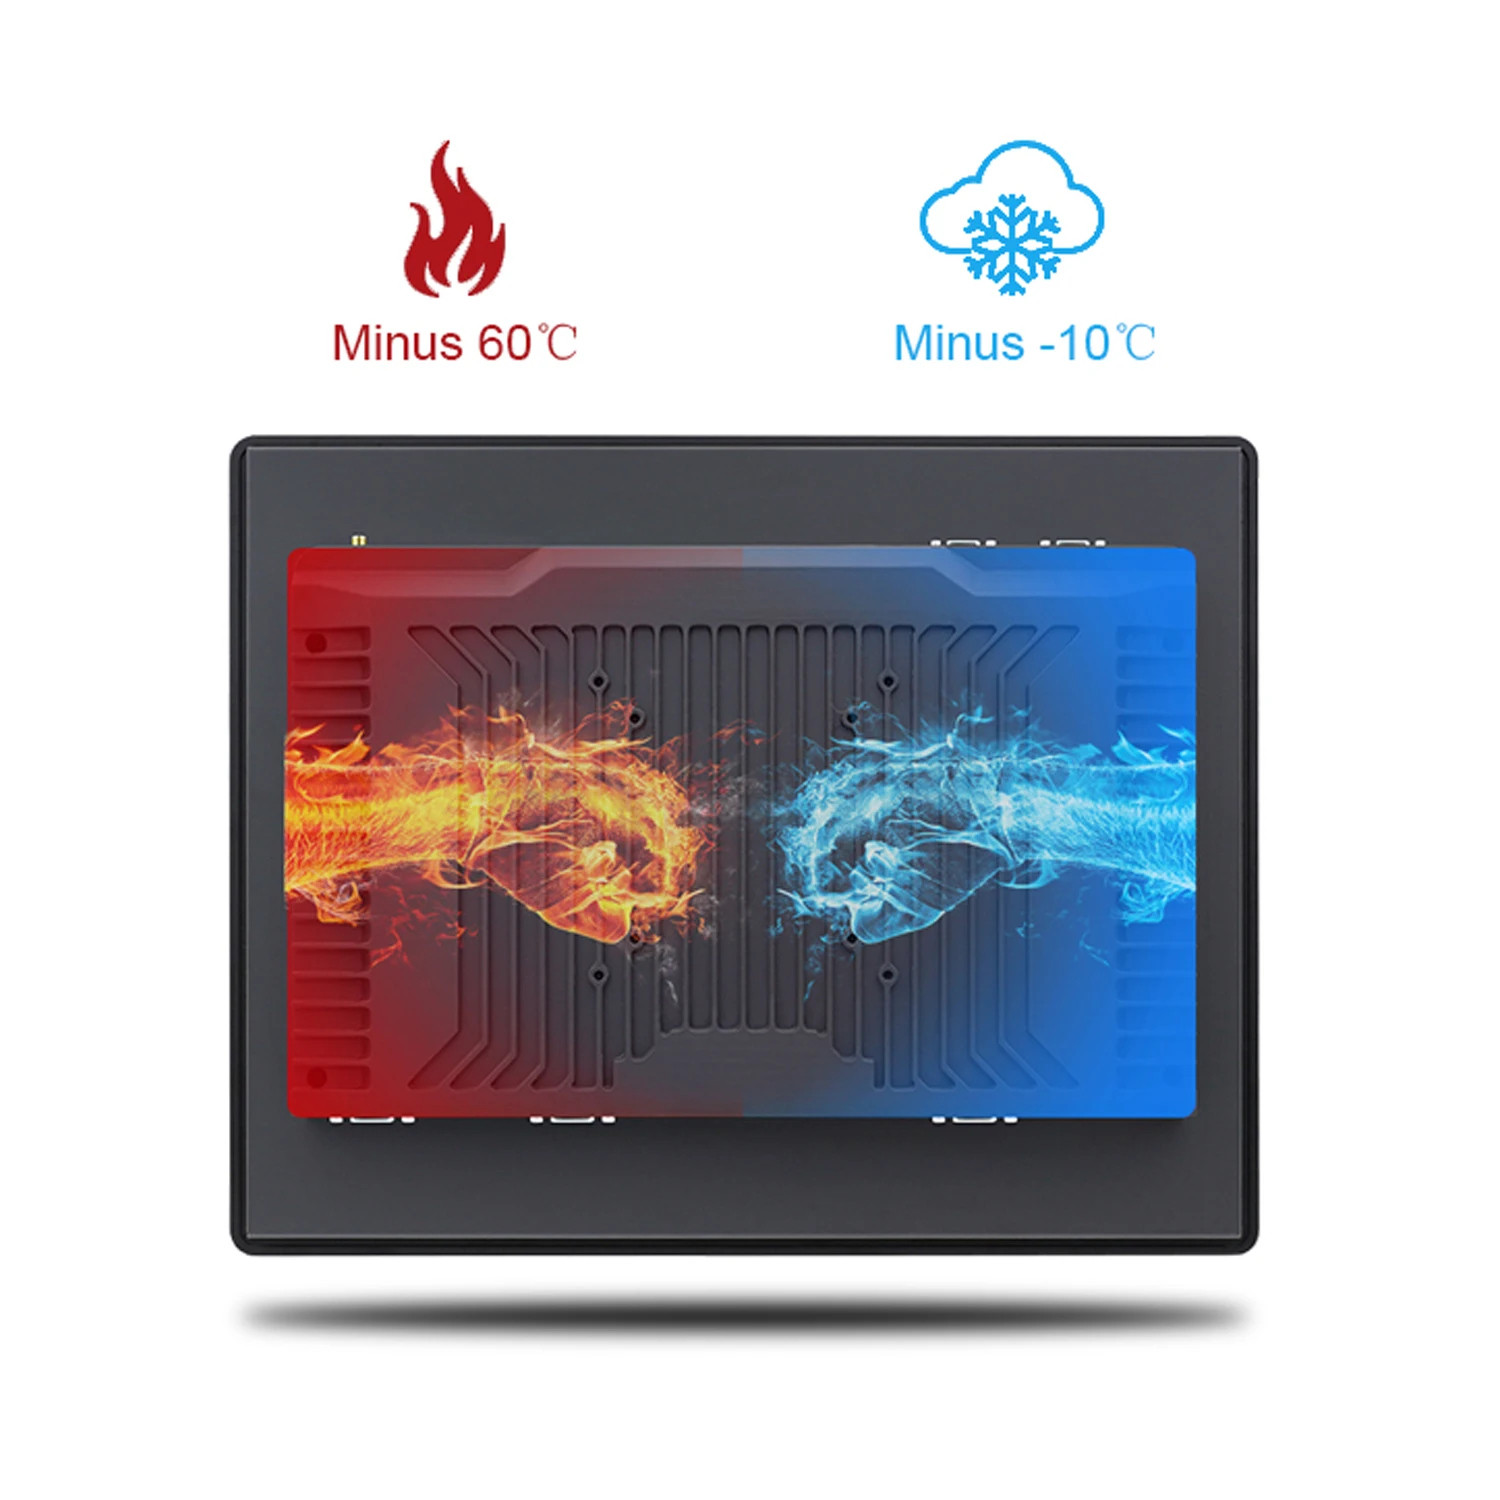 17 19 21 Inch Intel Core i5-5250U Embedded Industrial Computer All in One Mini Tablet Panel PC with Resistive Touch Screen WIFI enlarge